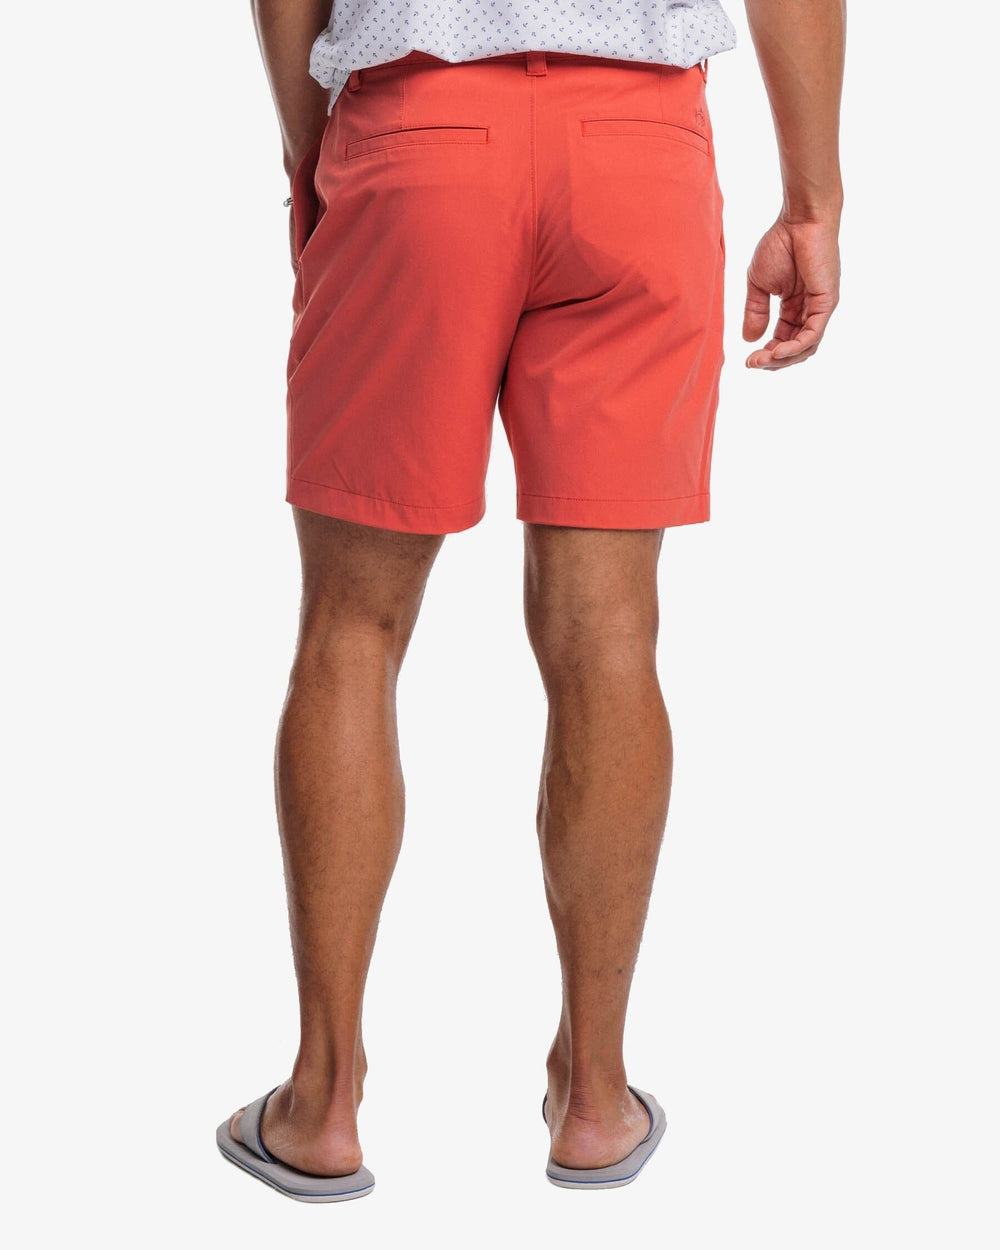 The back view of the Southern Tide brrr°®-die 8 Inch Performance Short by Southern Tide - Mineral Red